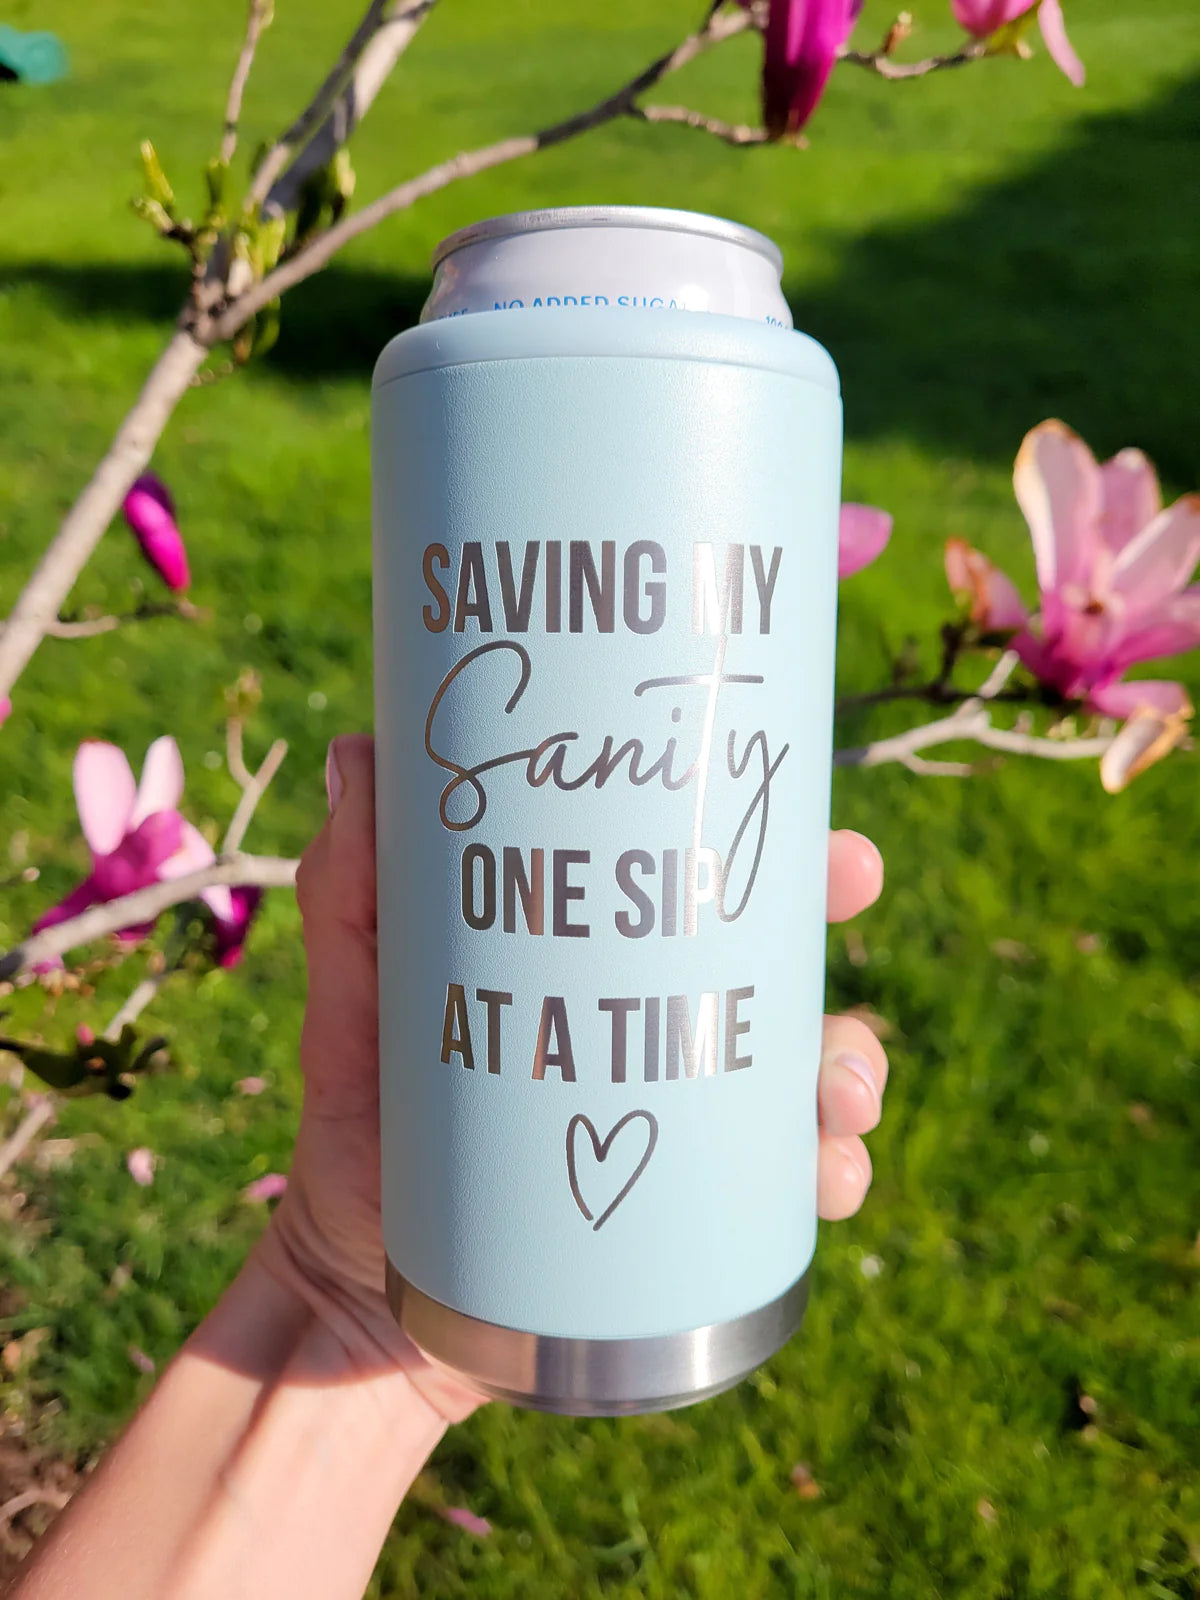 A tumbler that says Saving my sanity one sip at a time